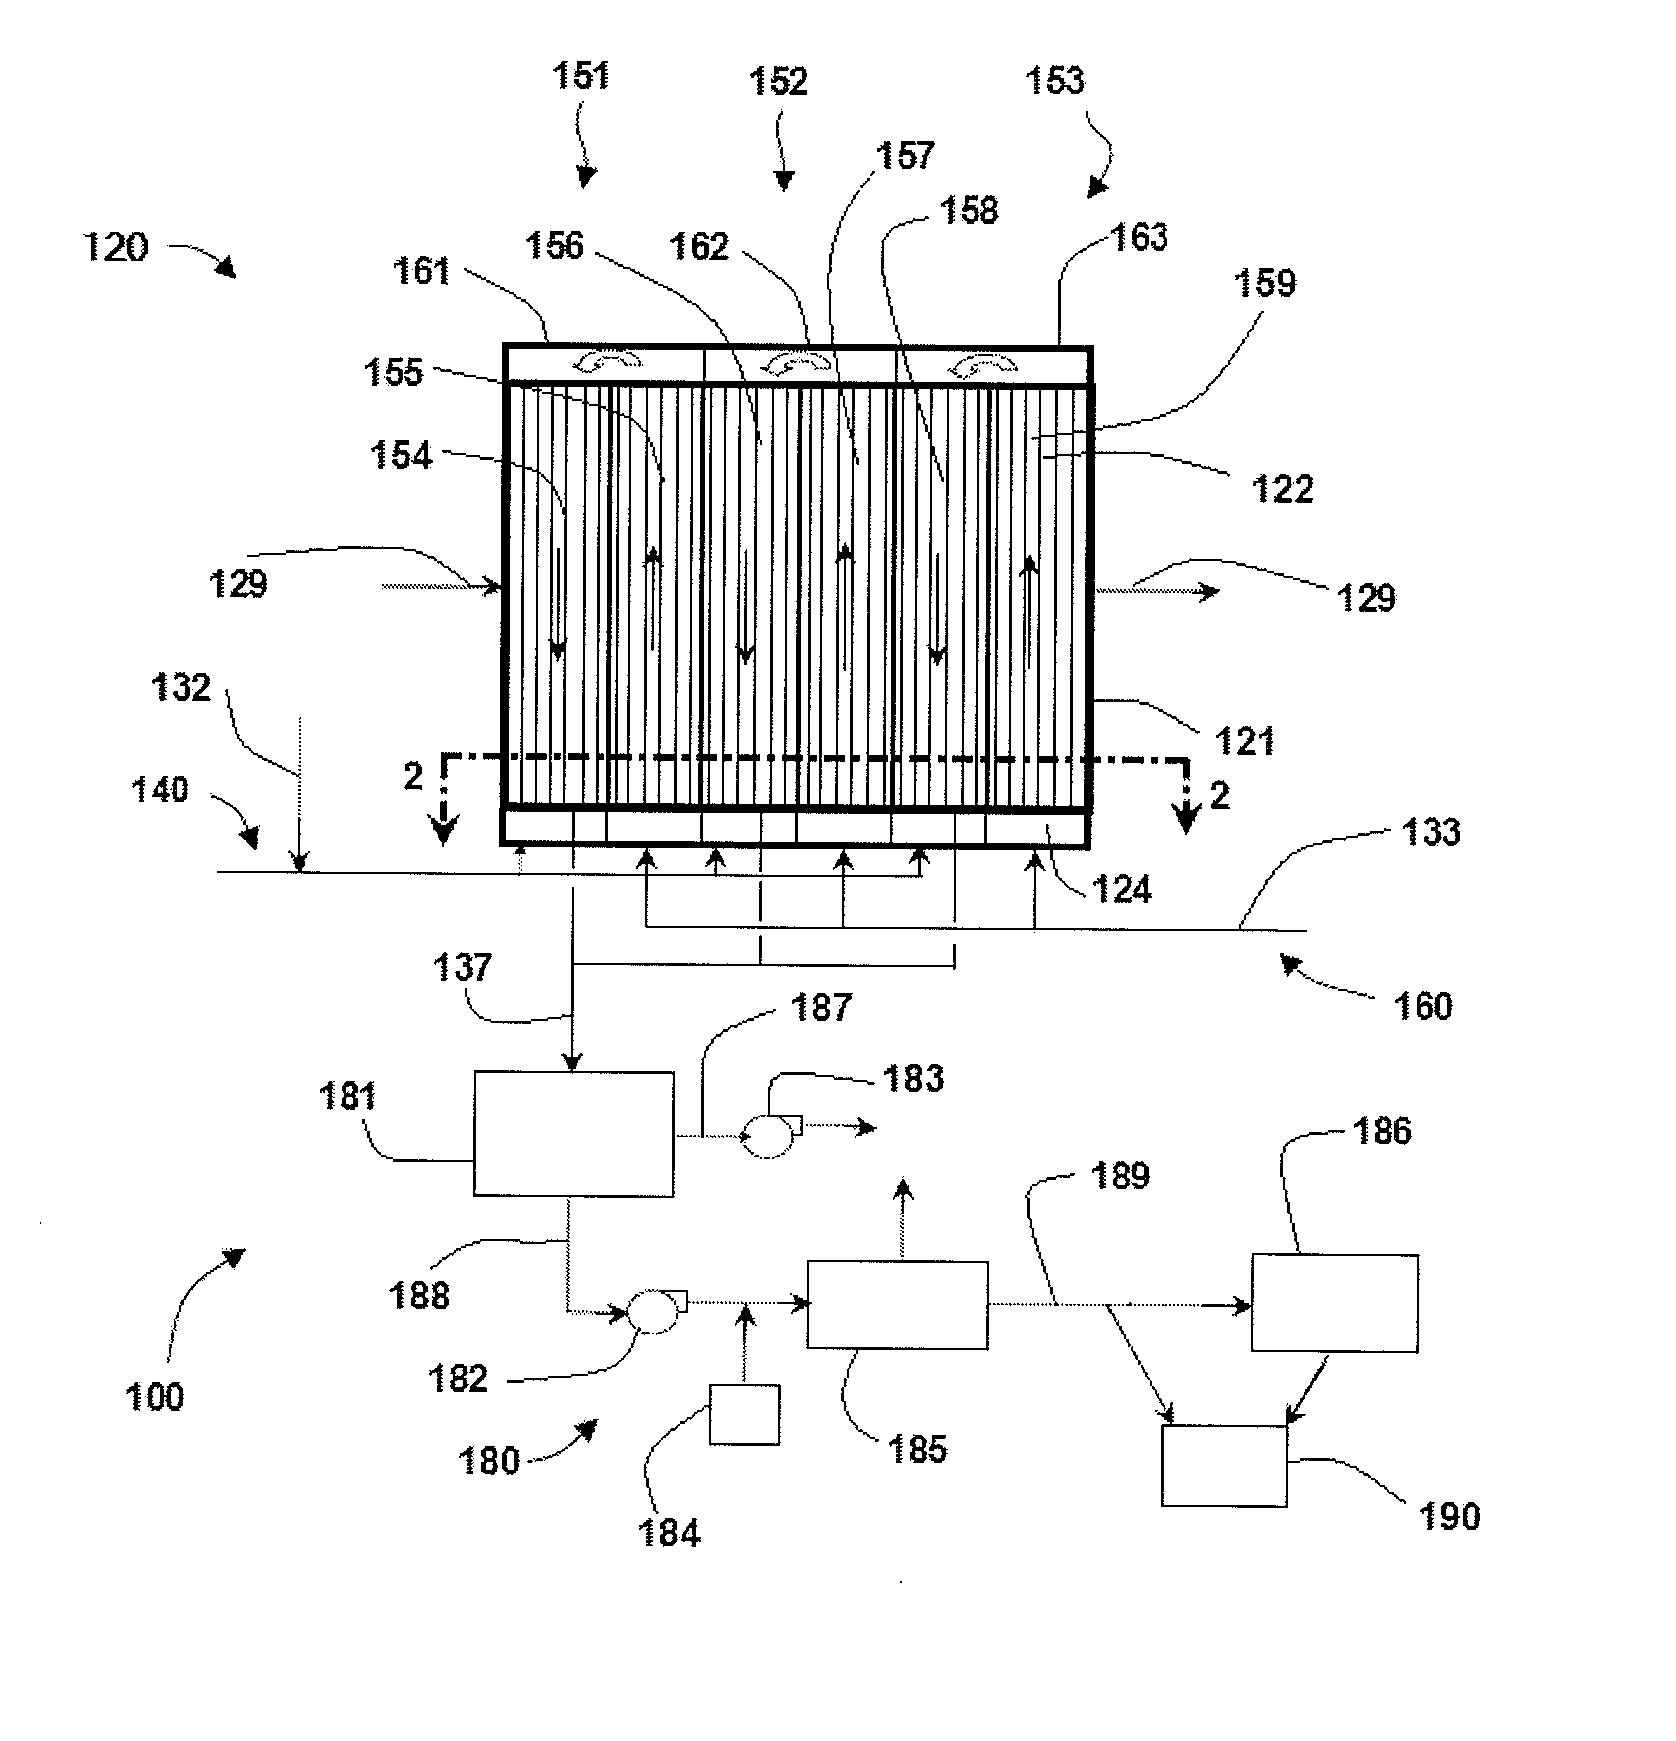 System and Method for Growing Photosynthetic Cells